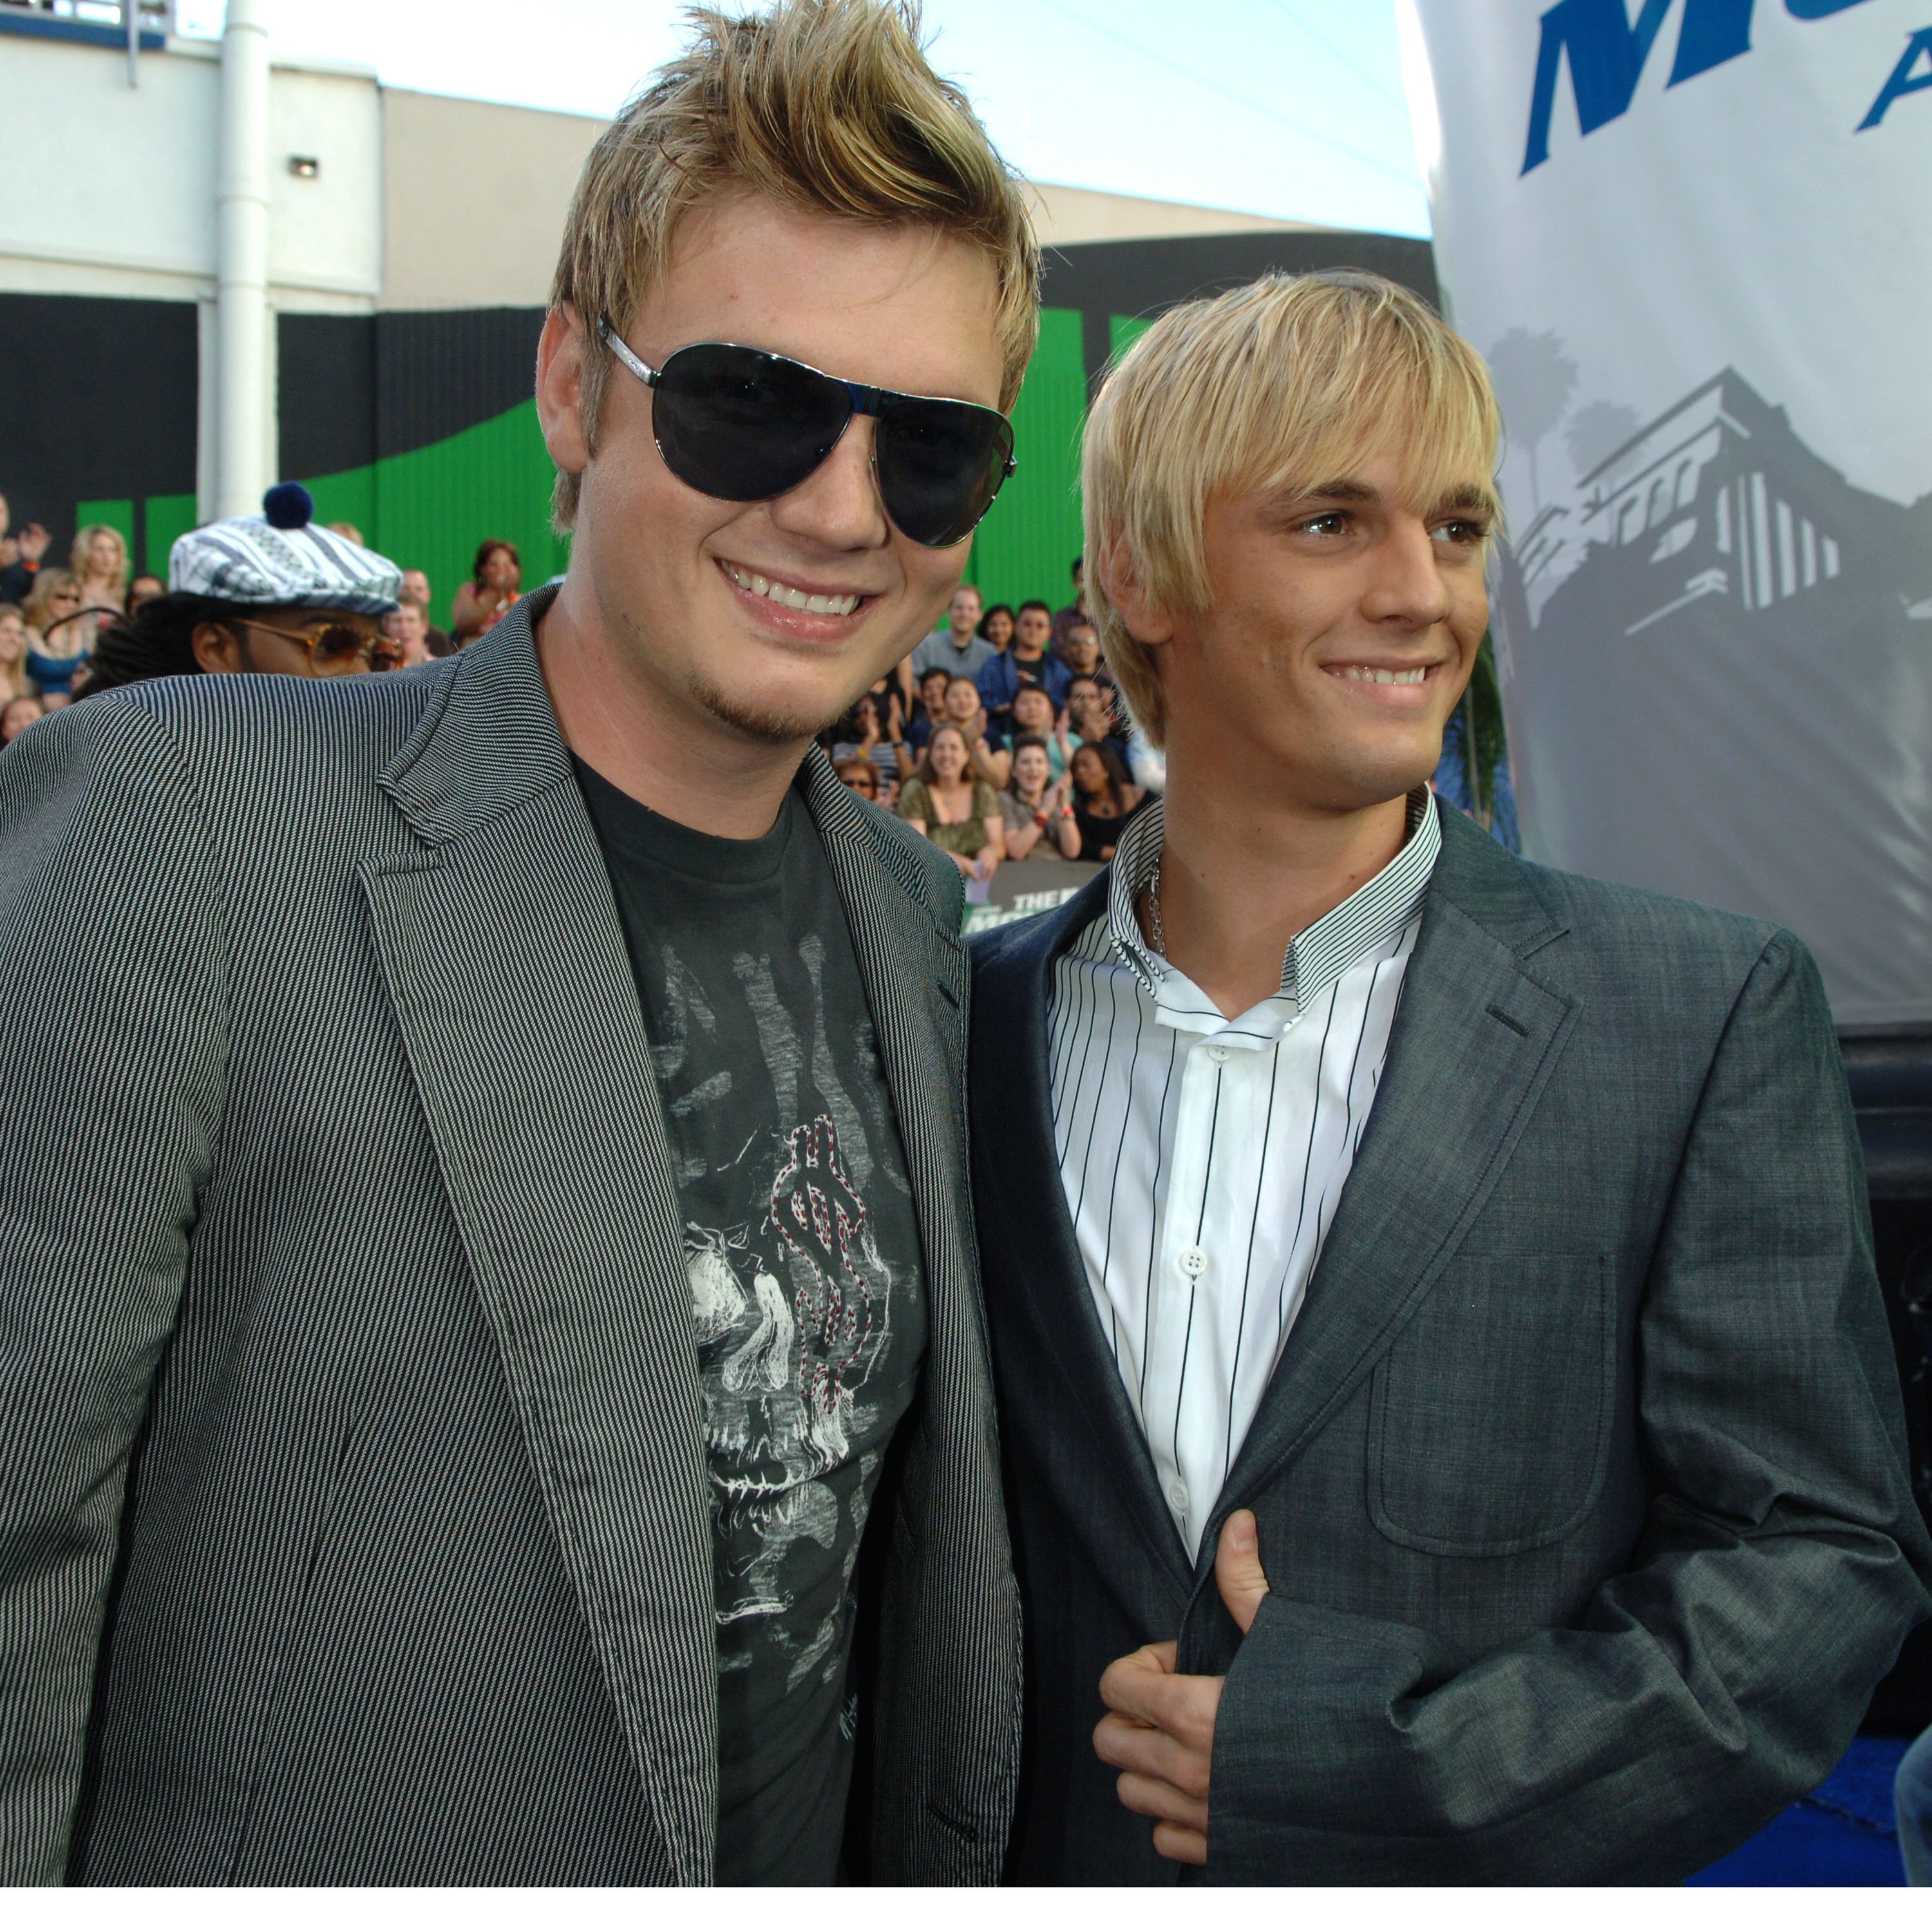 Nick and Aaron Carter during the MTV Movie Awards at Sony Studios in Culver City, California, on June 3, 2006 | Source: Getty Images